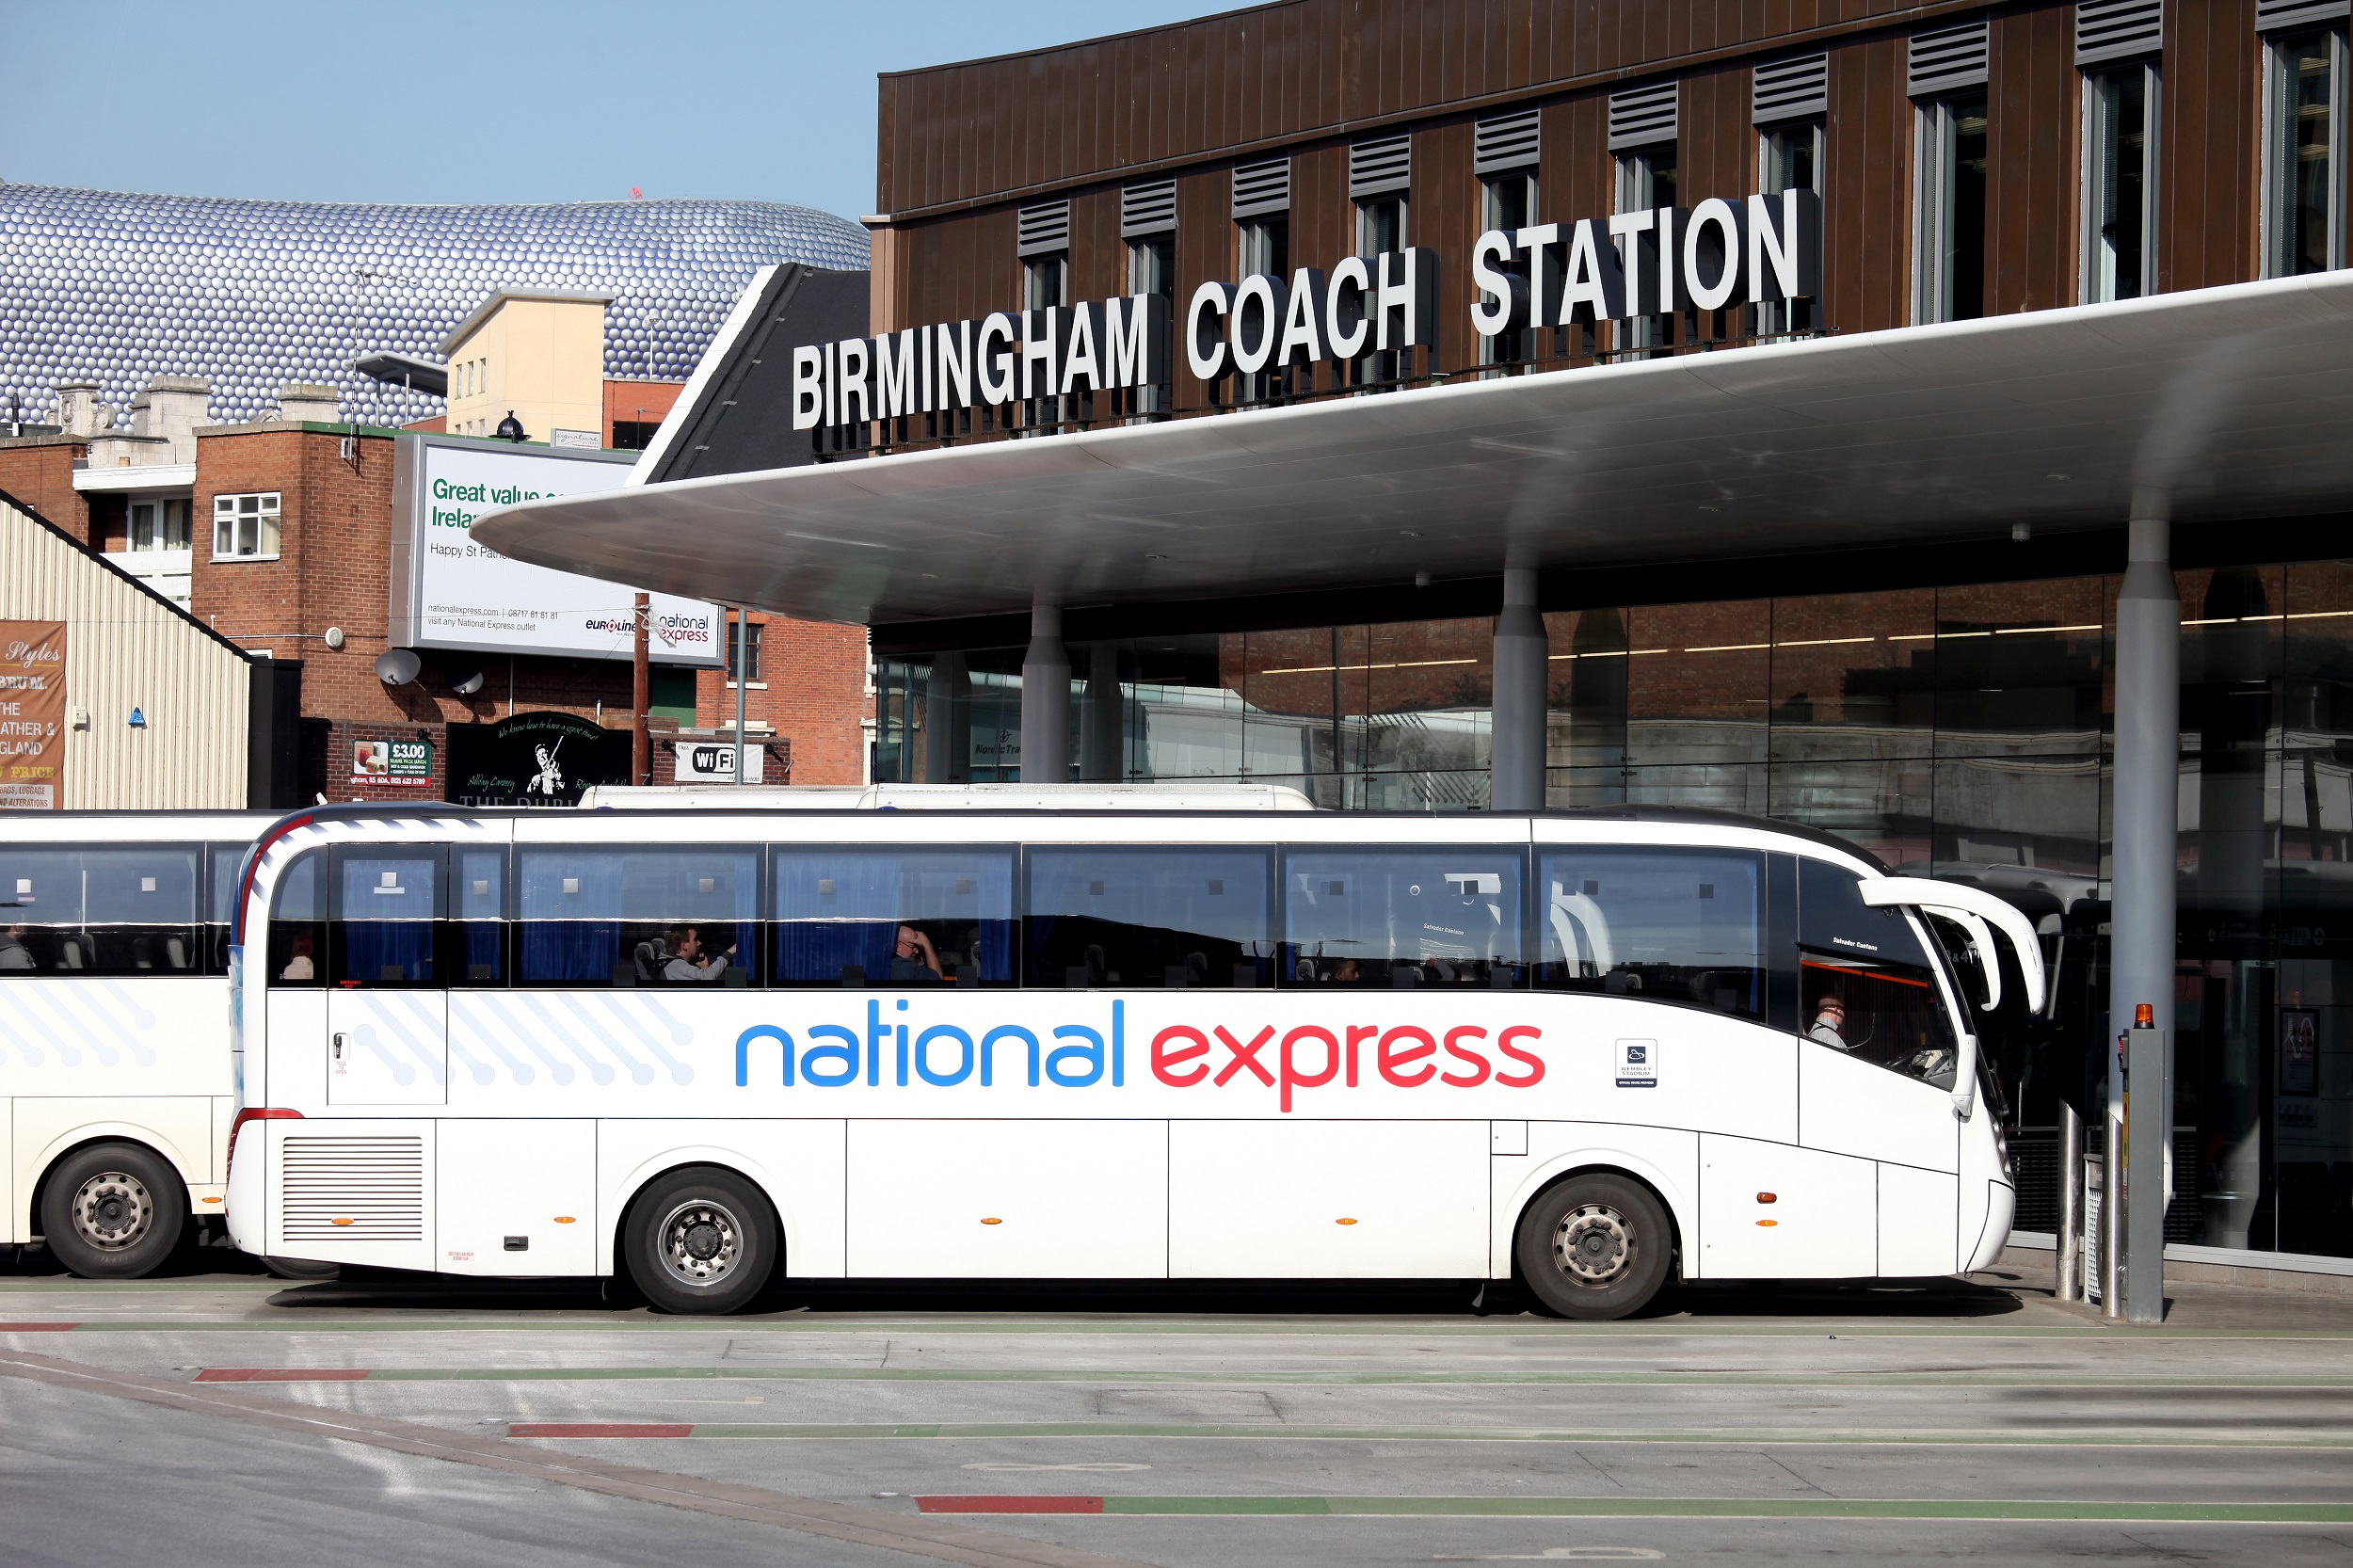 Coach demand is strong, says National Express